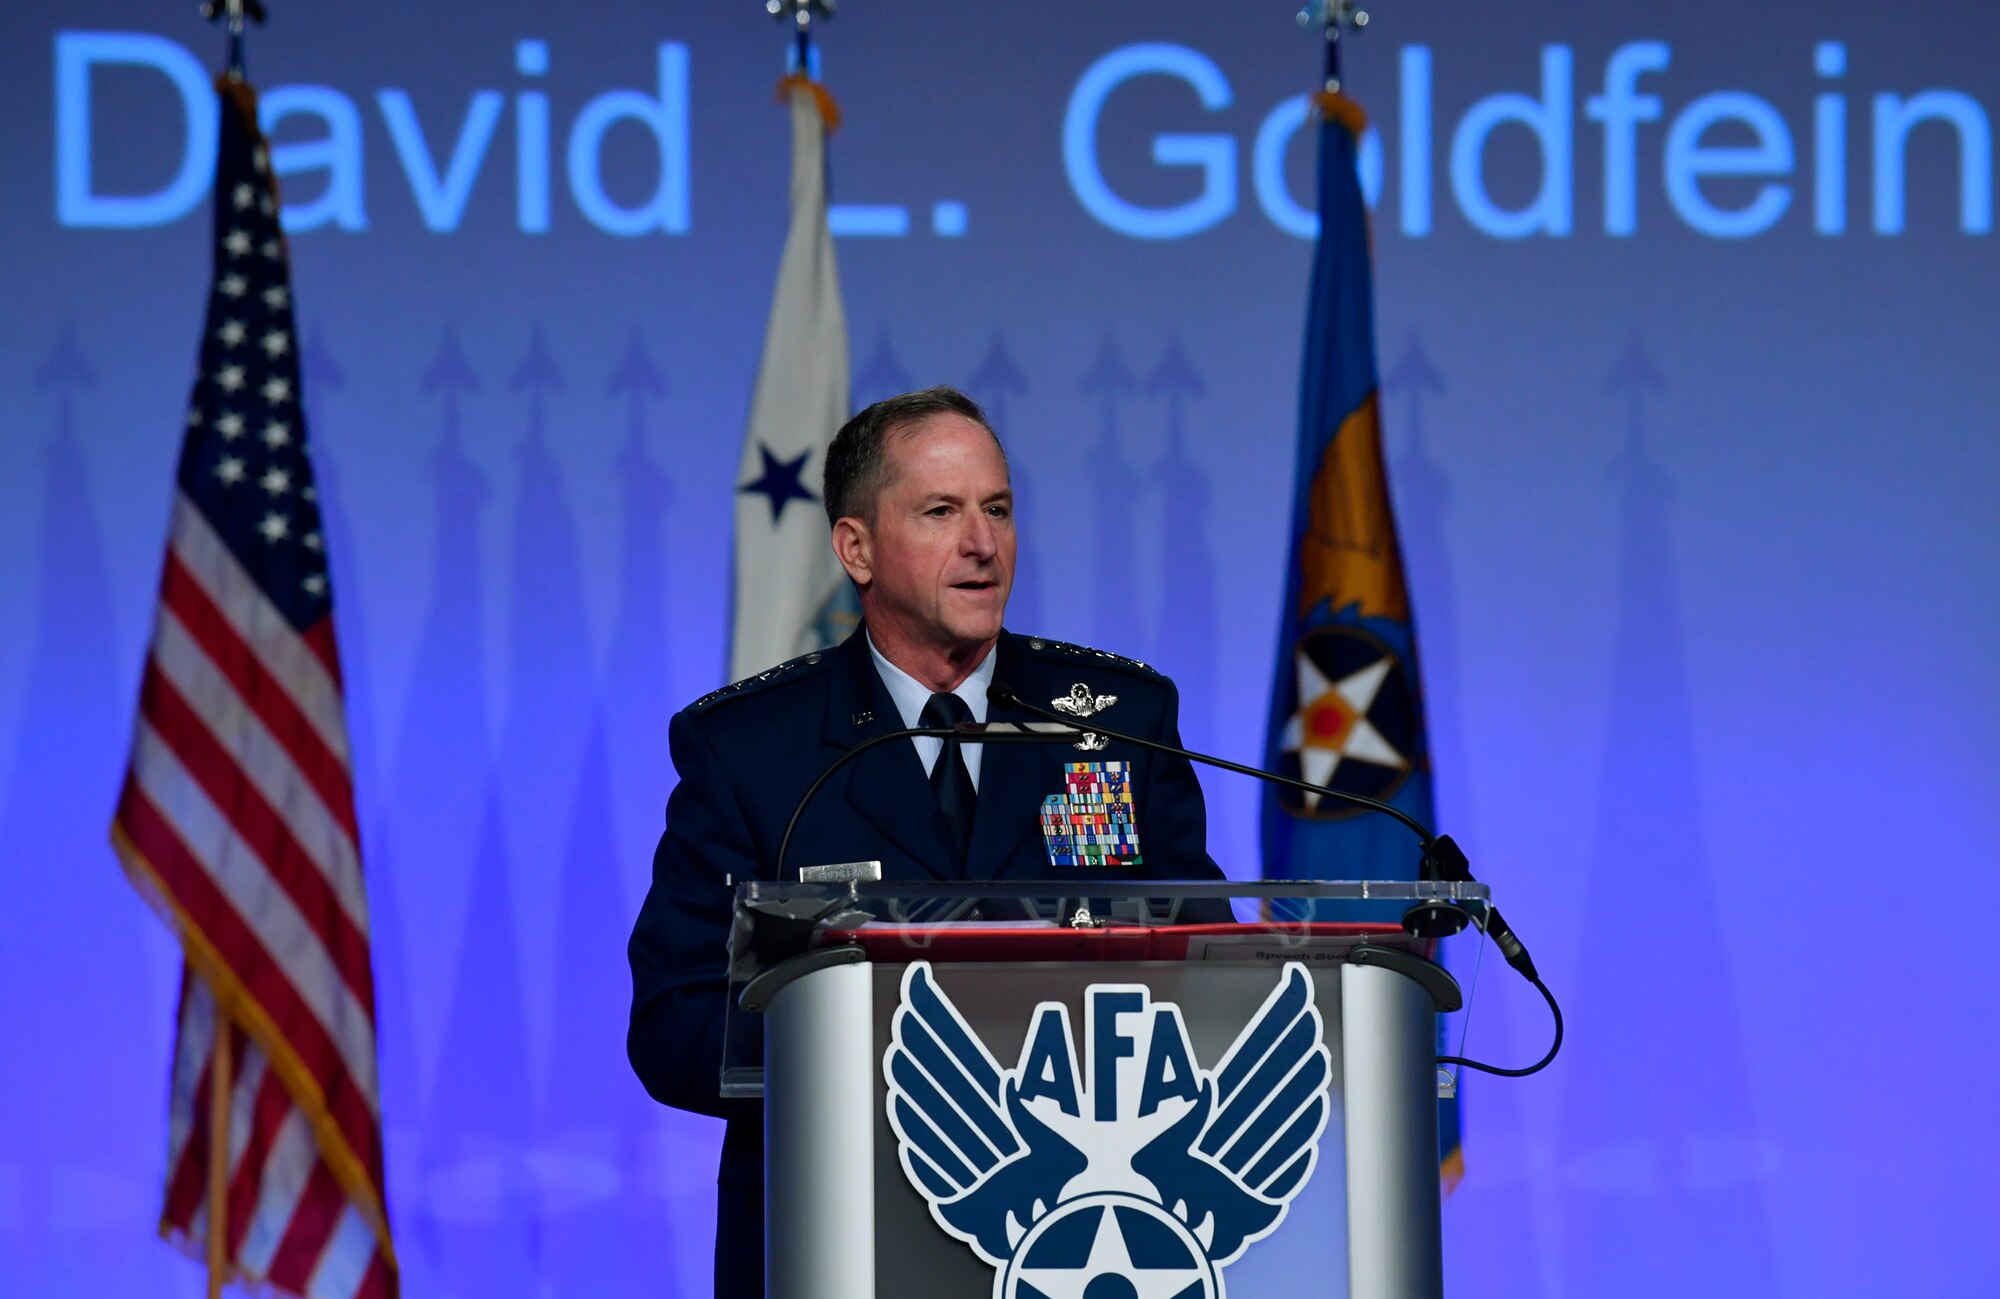 Air Force Chief of Staff Gen. David L. Goldfein, delivers his Air Force Update speech during the Air Force Association Air, Space and Cyber Conference in National Harbor, Md., Sept. 18, 2018. During his remarks, Goldfein highlighted his vision for the future of multi-domain operations. (U.S. Air Force photo by Wayne Clark)